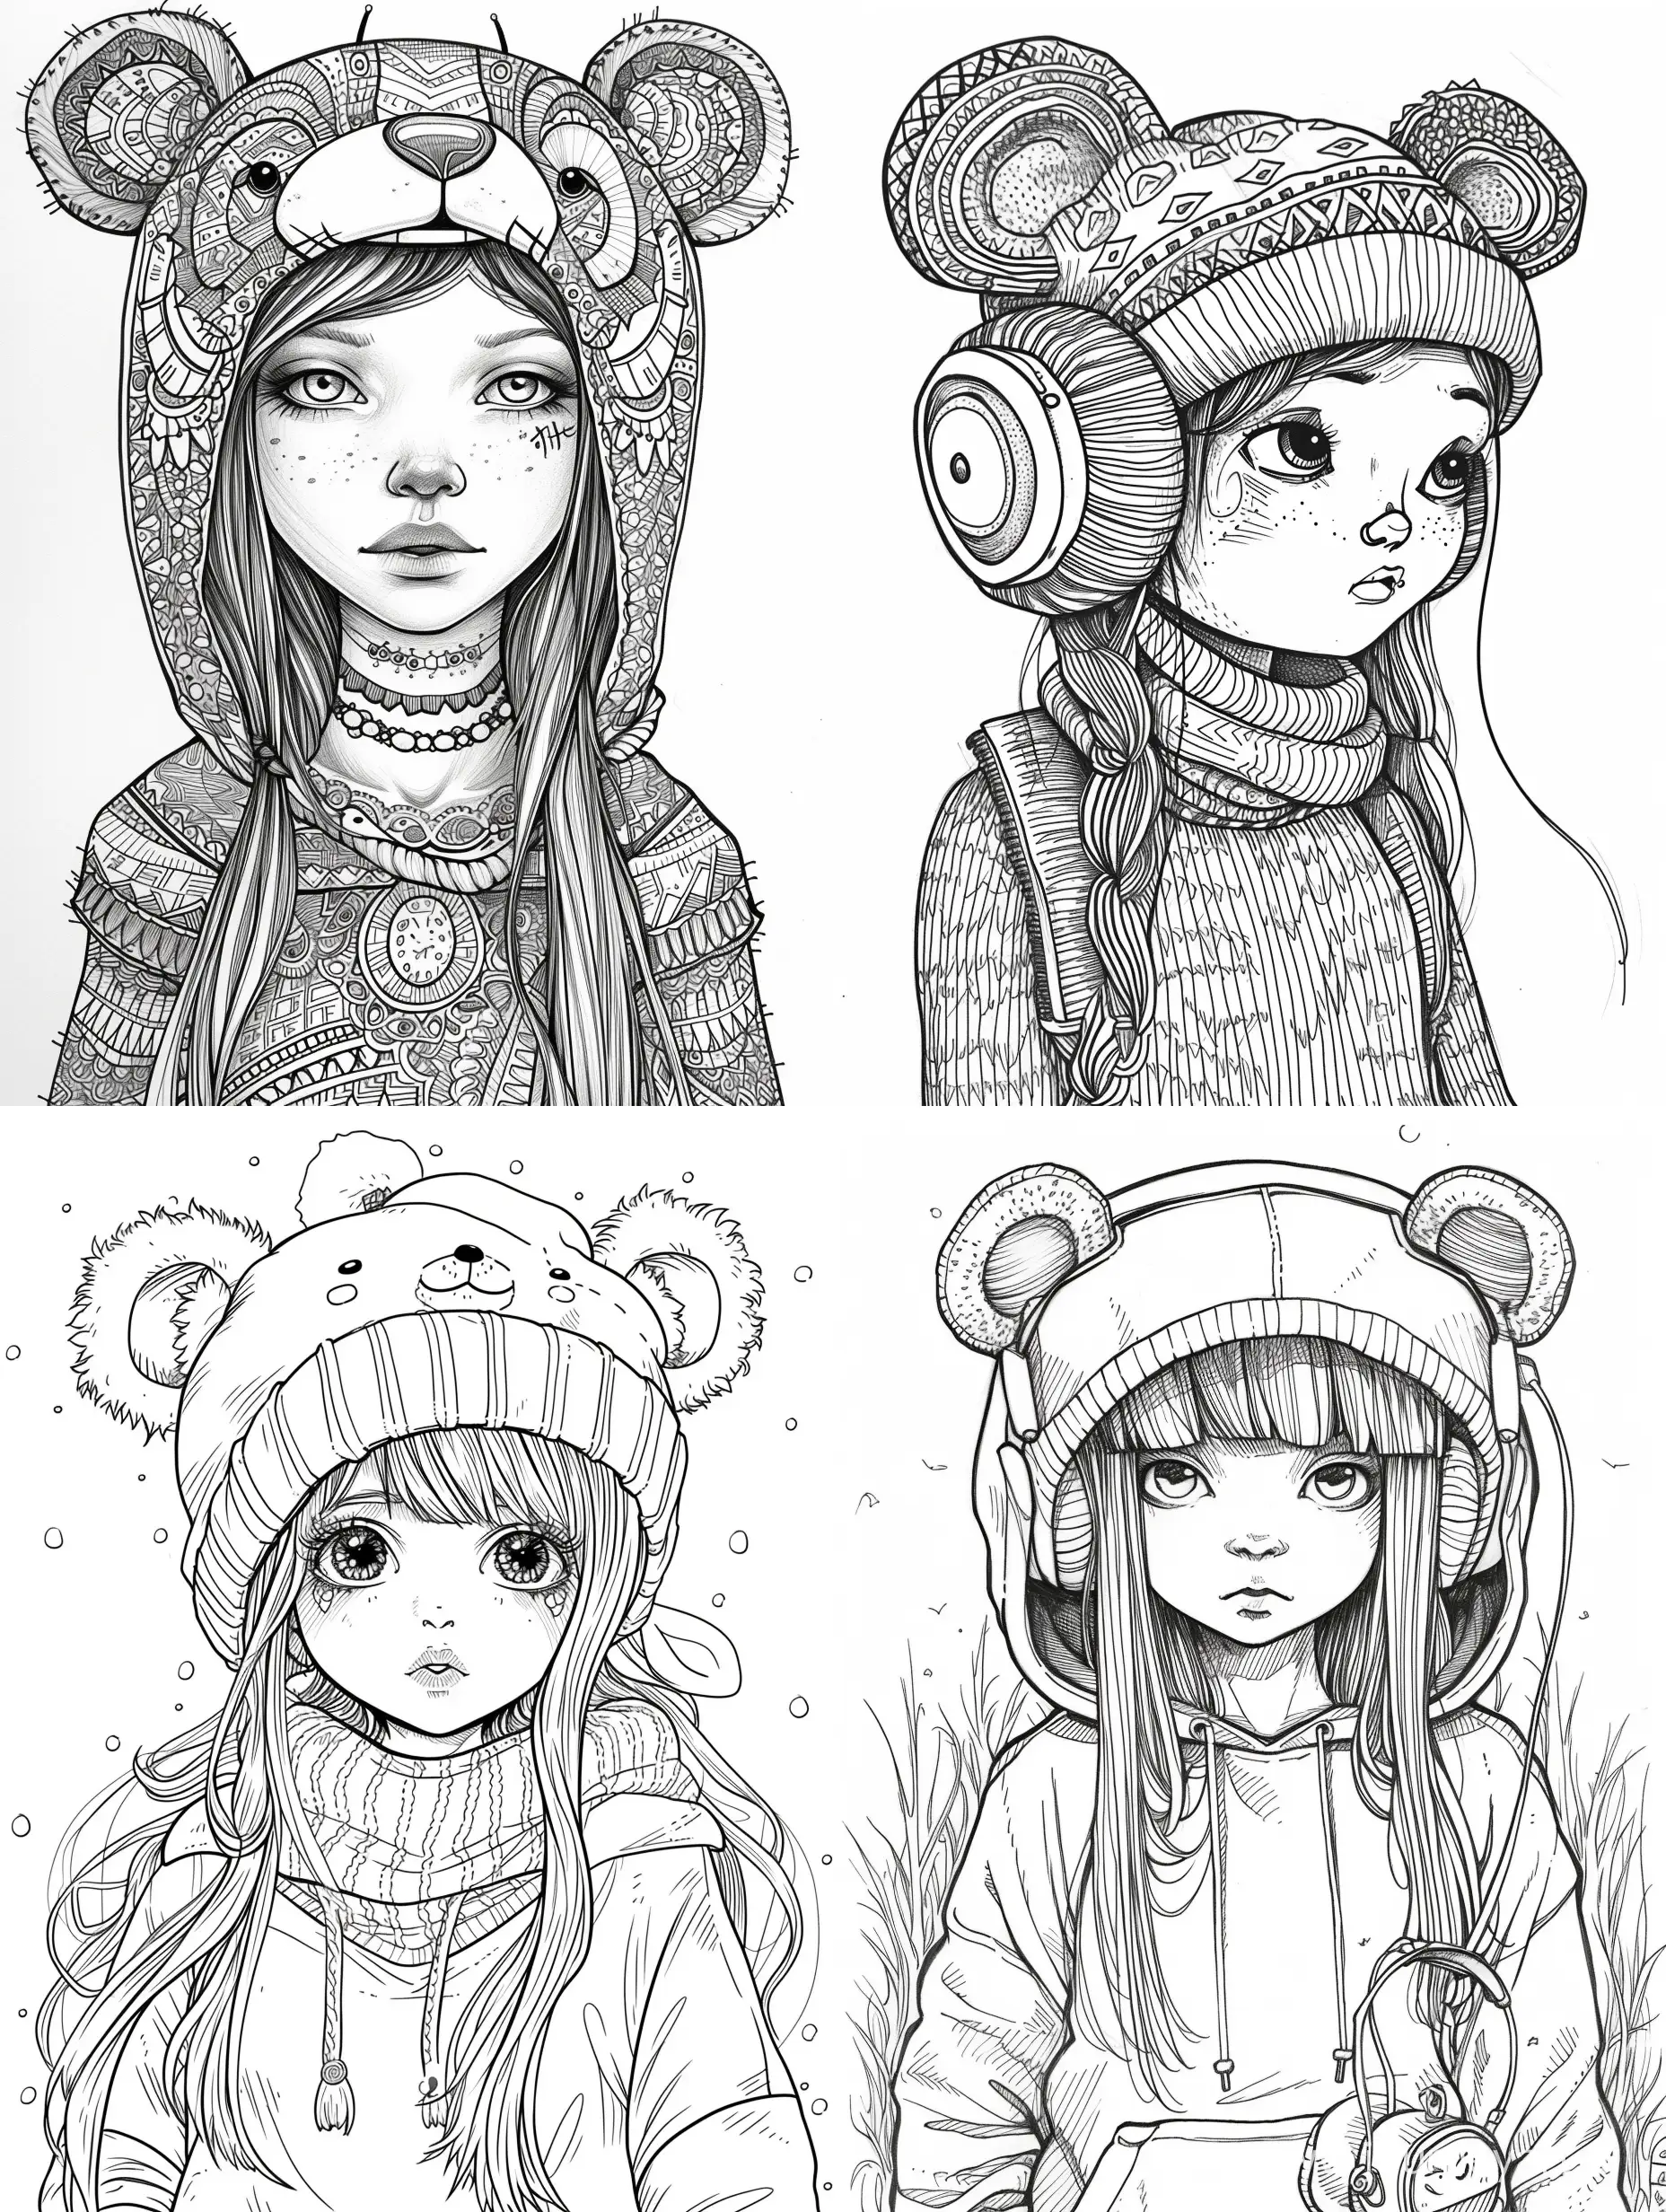 Adorable-BearbrickjiaStyle-Girl-in-Black-and-White-Coloring-Book-Illustration